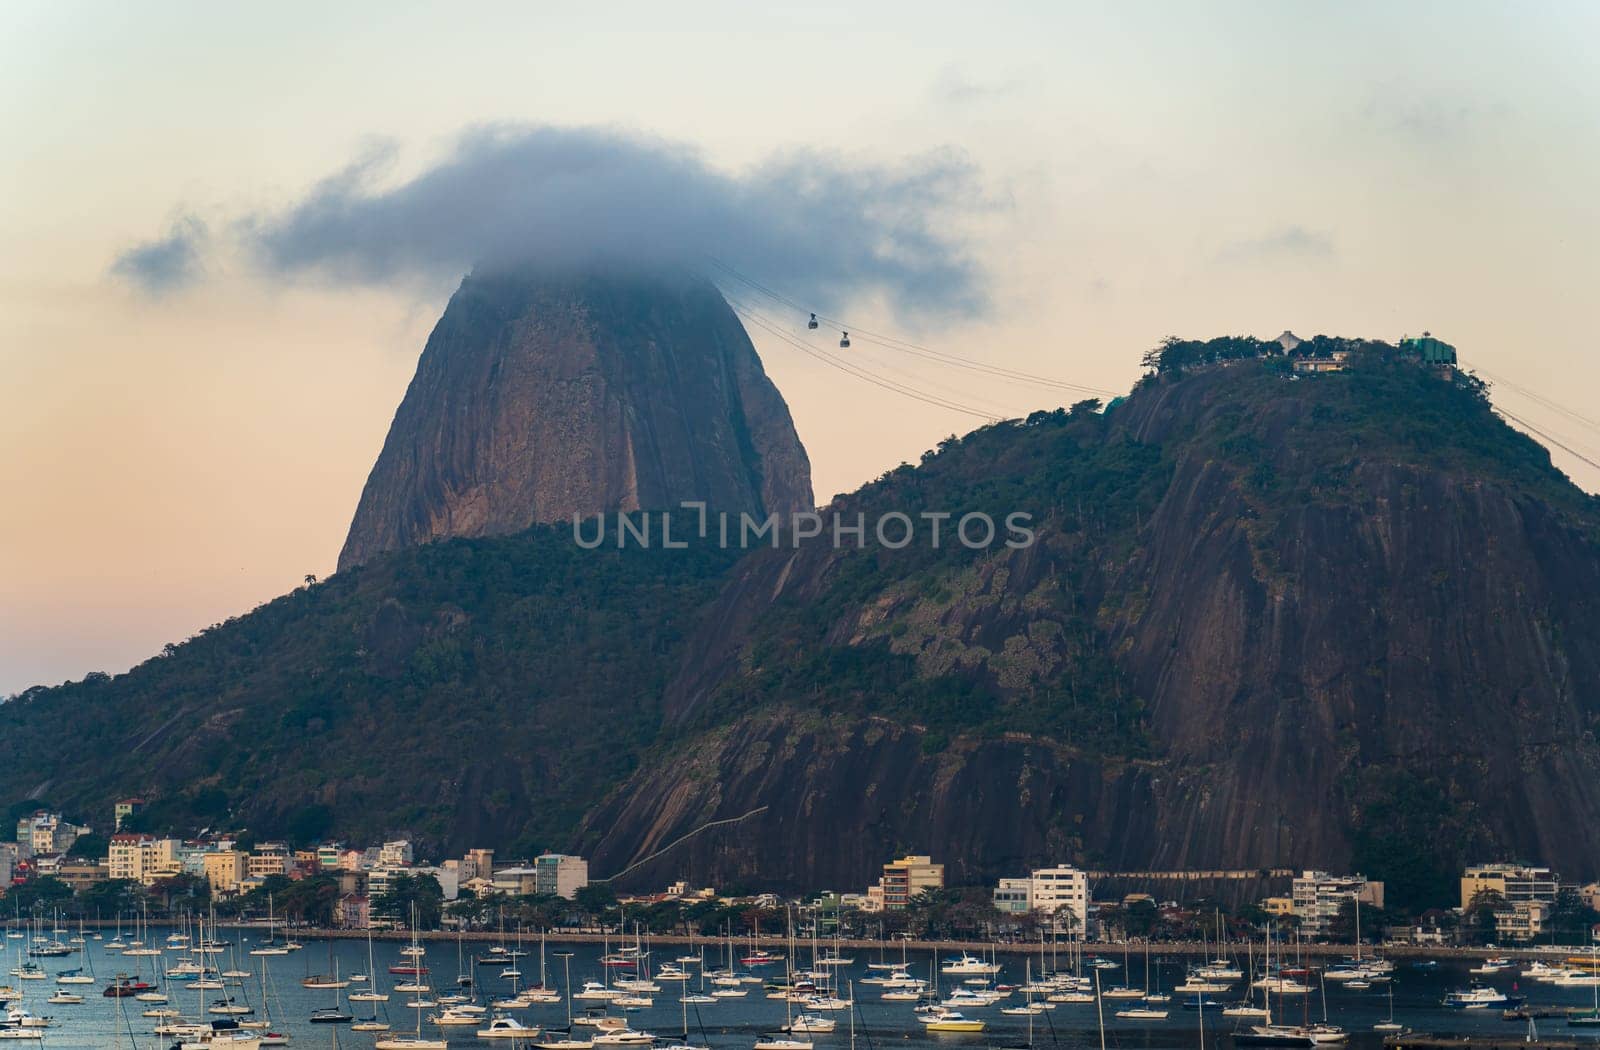 Twilight blankets Rio as cable cars climb Sugarloaf Mt.